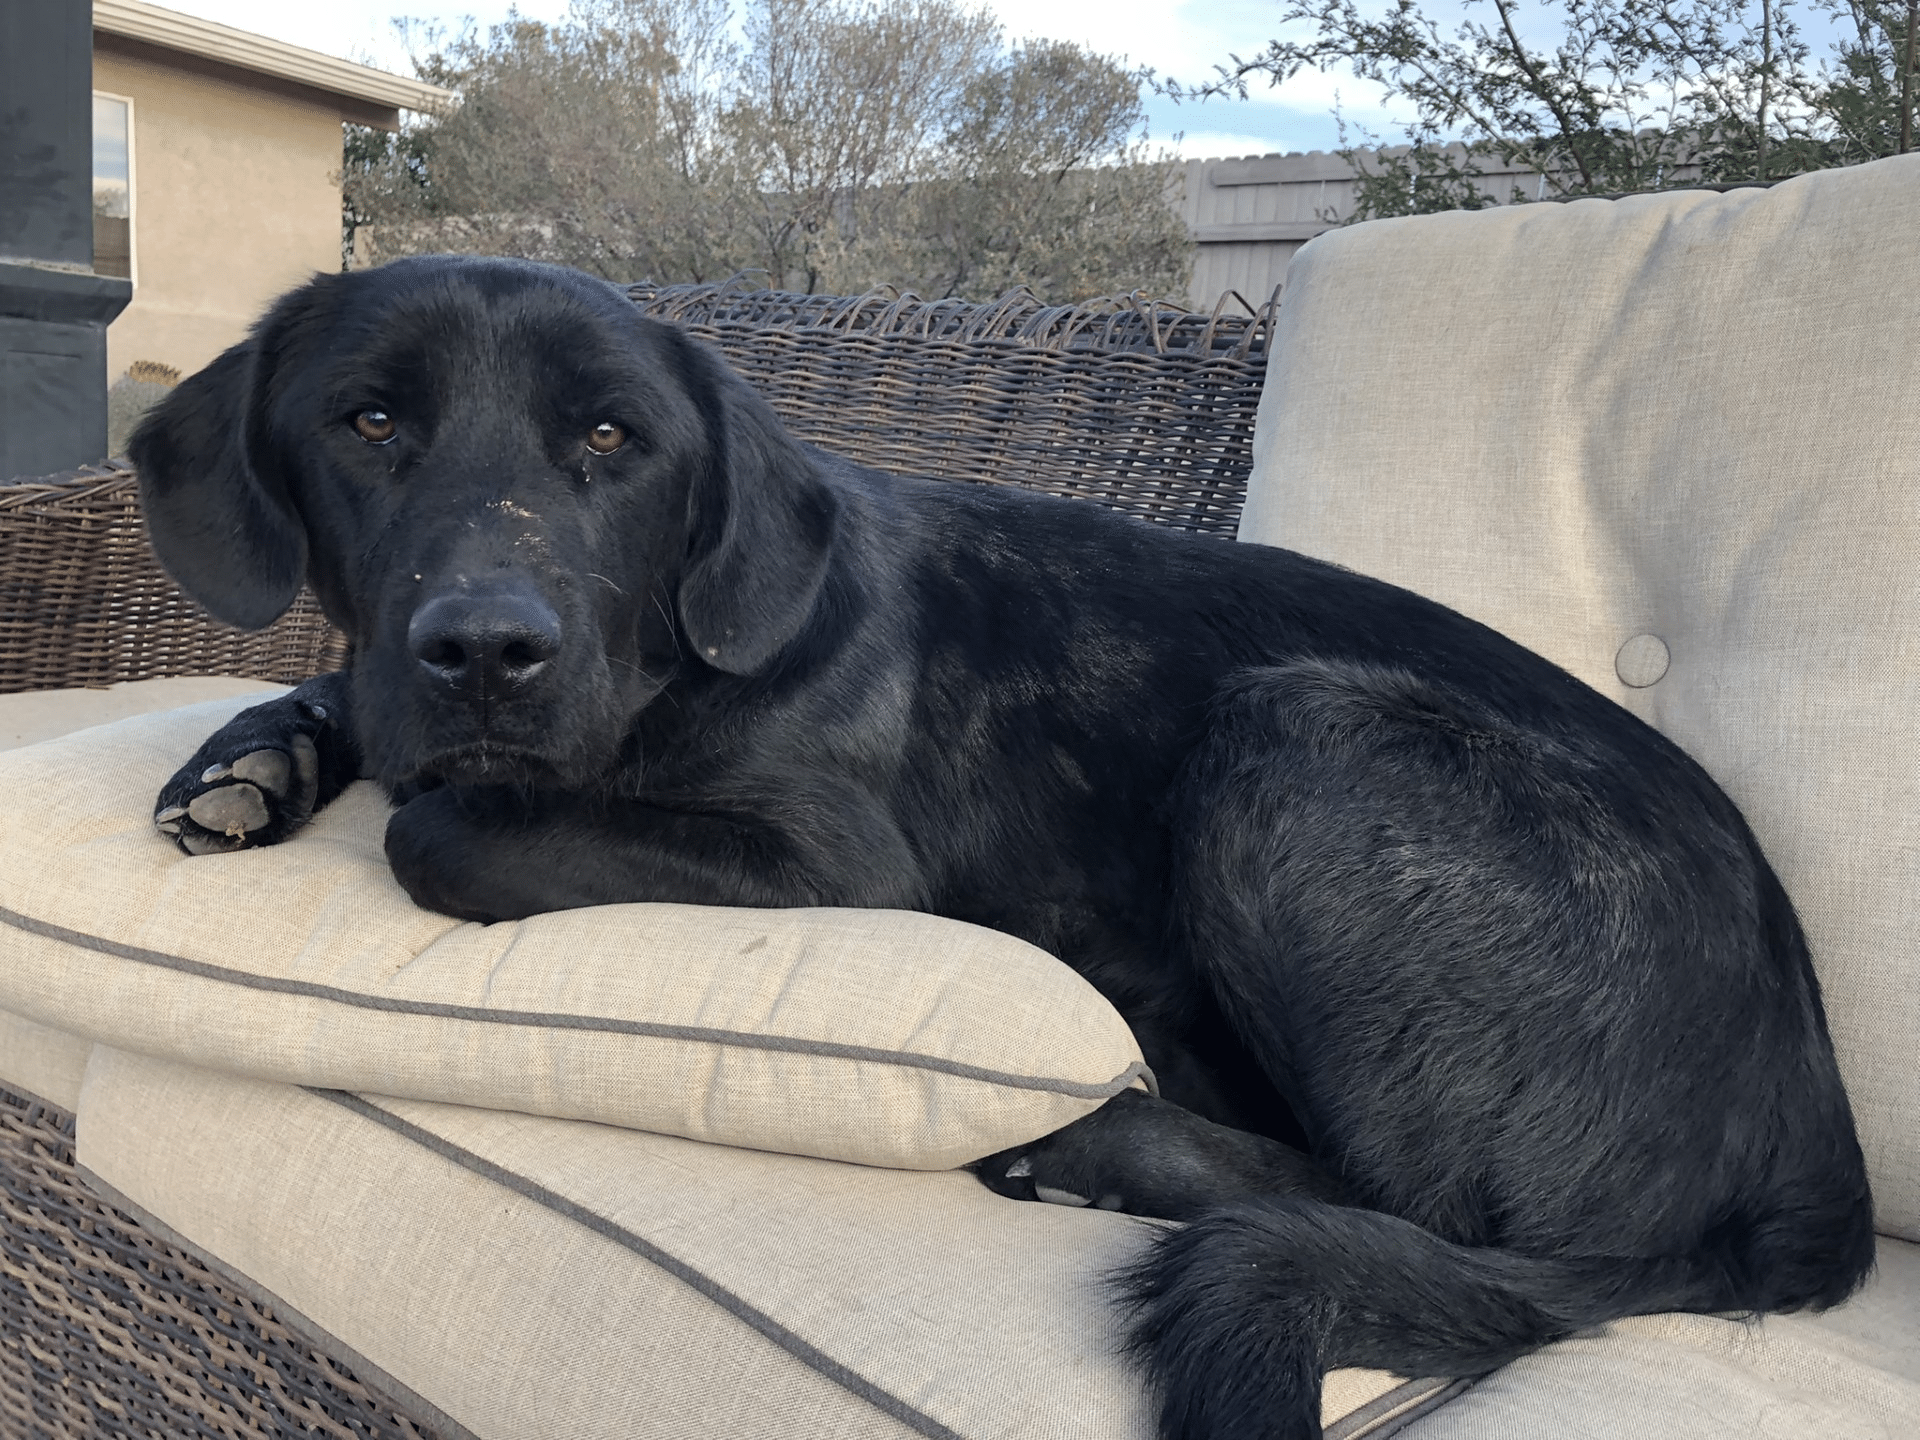 A dirty, scraped-up black Labrador retriever lies on a cushion and looks at the camera with an apprehensive expression.